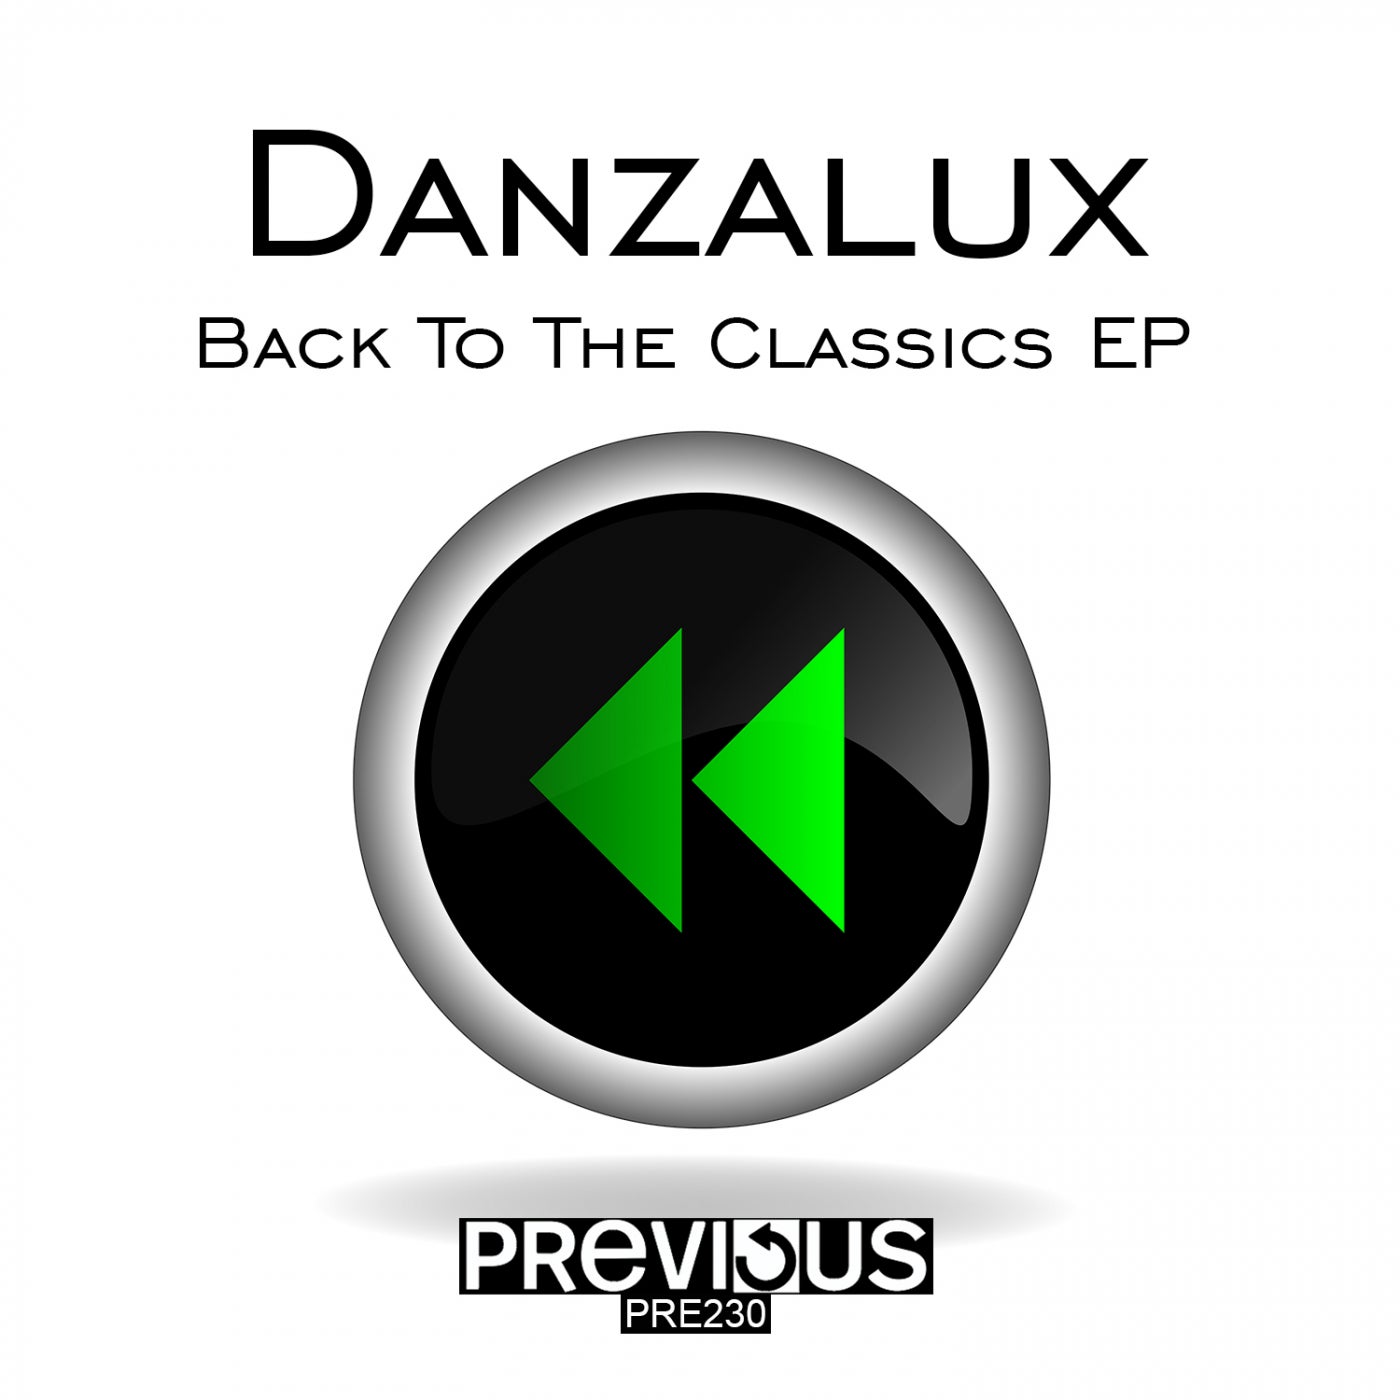 Back To The Classics EP